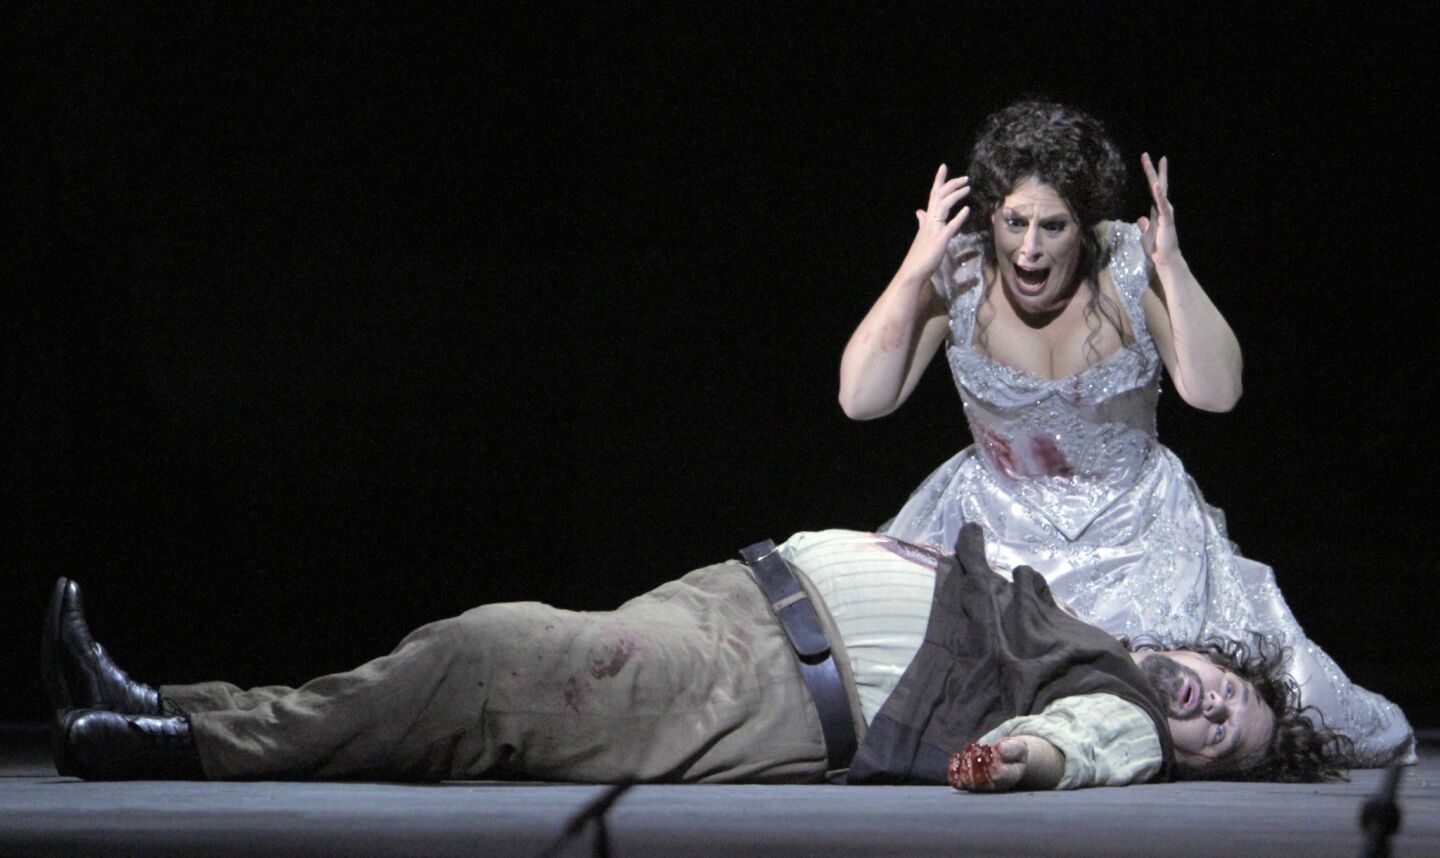 Sondra Radvanovsky as Floria Tosca and Marco Berti as Mario Cavaradossi in "Tosca" at the Dorothy Chandler Pavilion. REVIEW: With 'Tosca,' Los Angeles Opera goes for grand